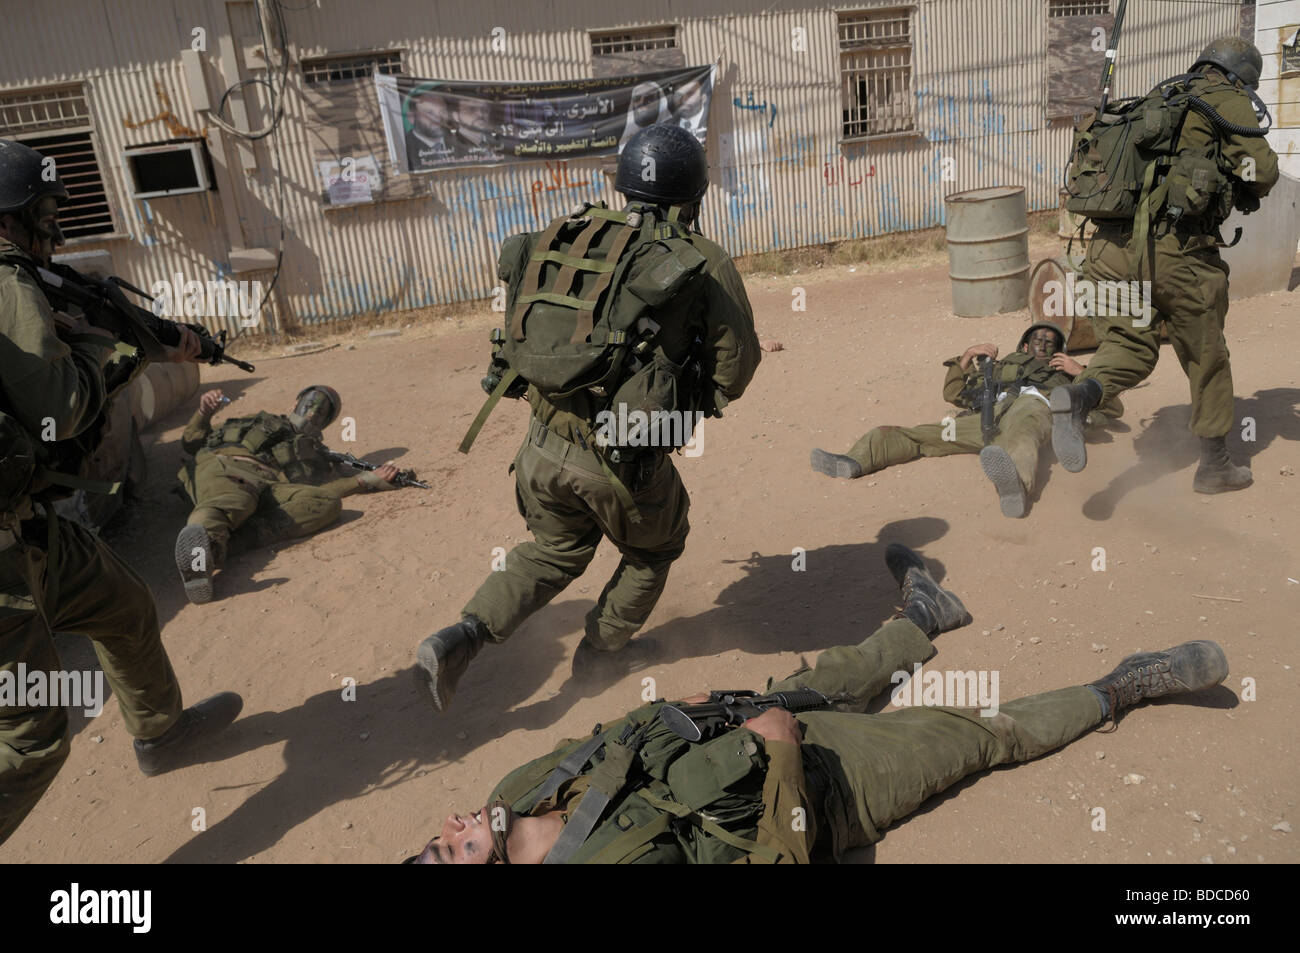 A live simulation of the IDF medical response team in urban warfare, Tzrifin army base Central Israel Stock Photo